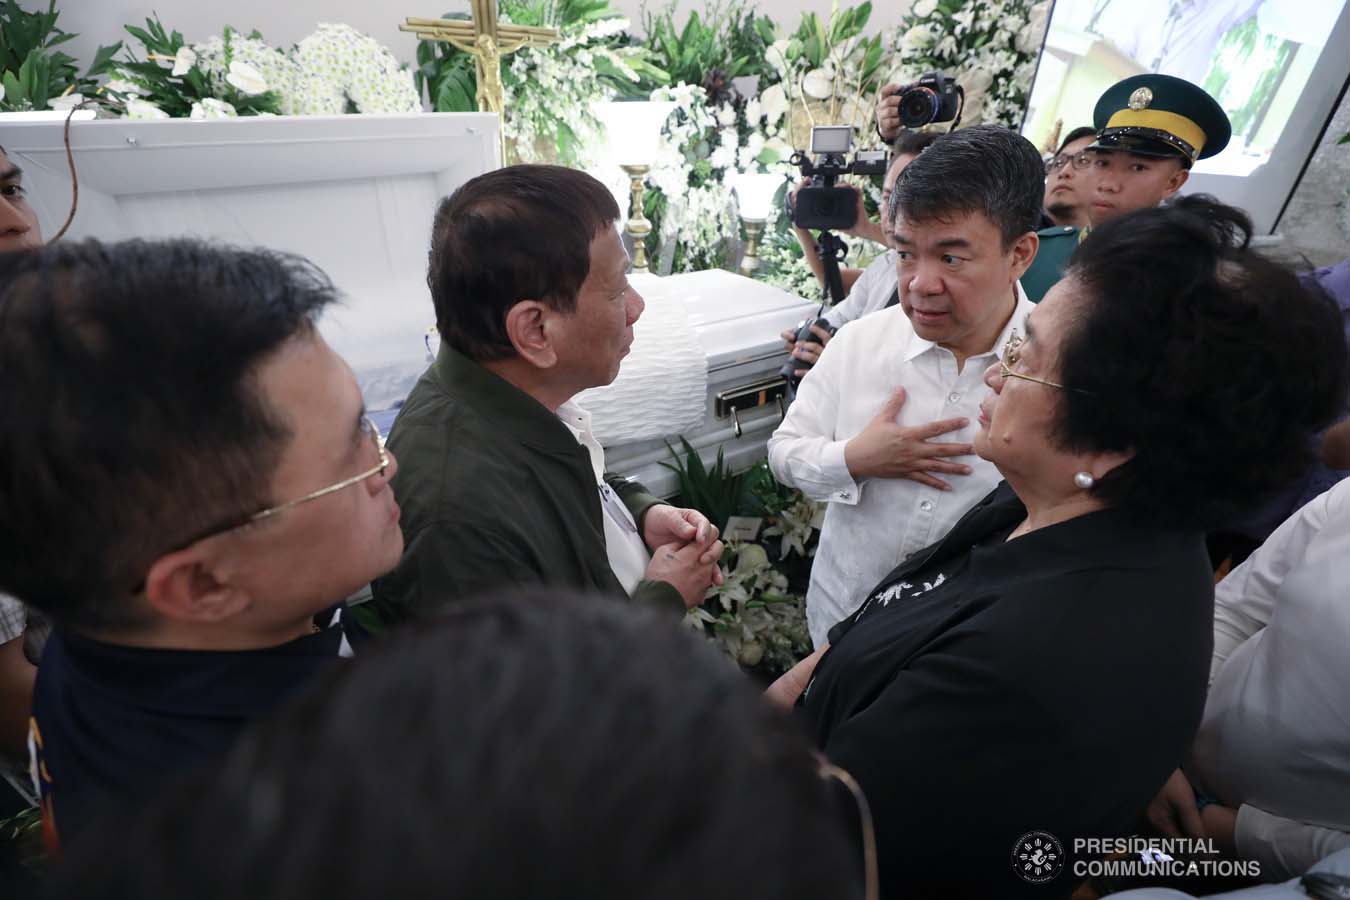 President Rodrigo Roa Duterte condoles with the family of the late former Senate President Aquilino Pimentel Jr. as he visits the wake at the Heritage Memorial Park in Taguig City on October 22, 2019. KARL NORMAN ALONZO/PRESIDENTIAL PHOTO